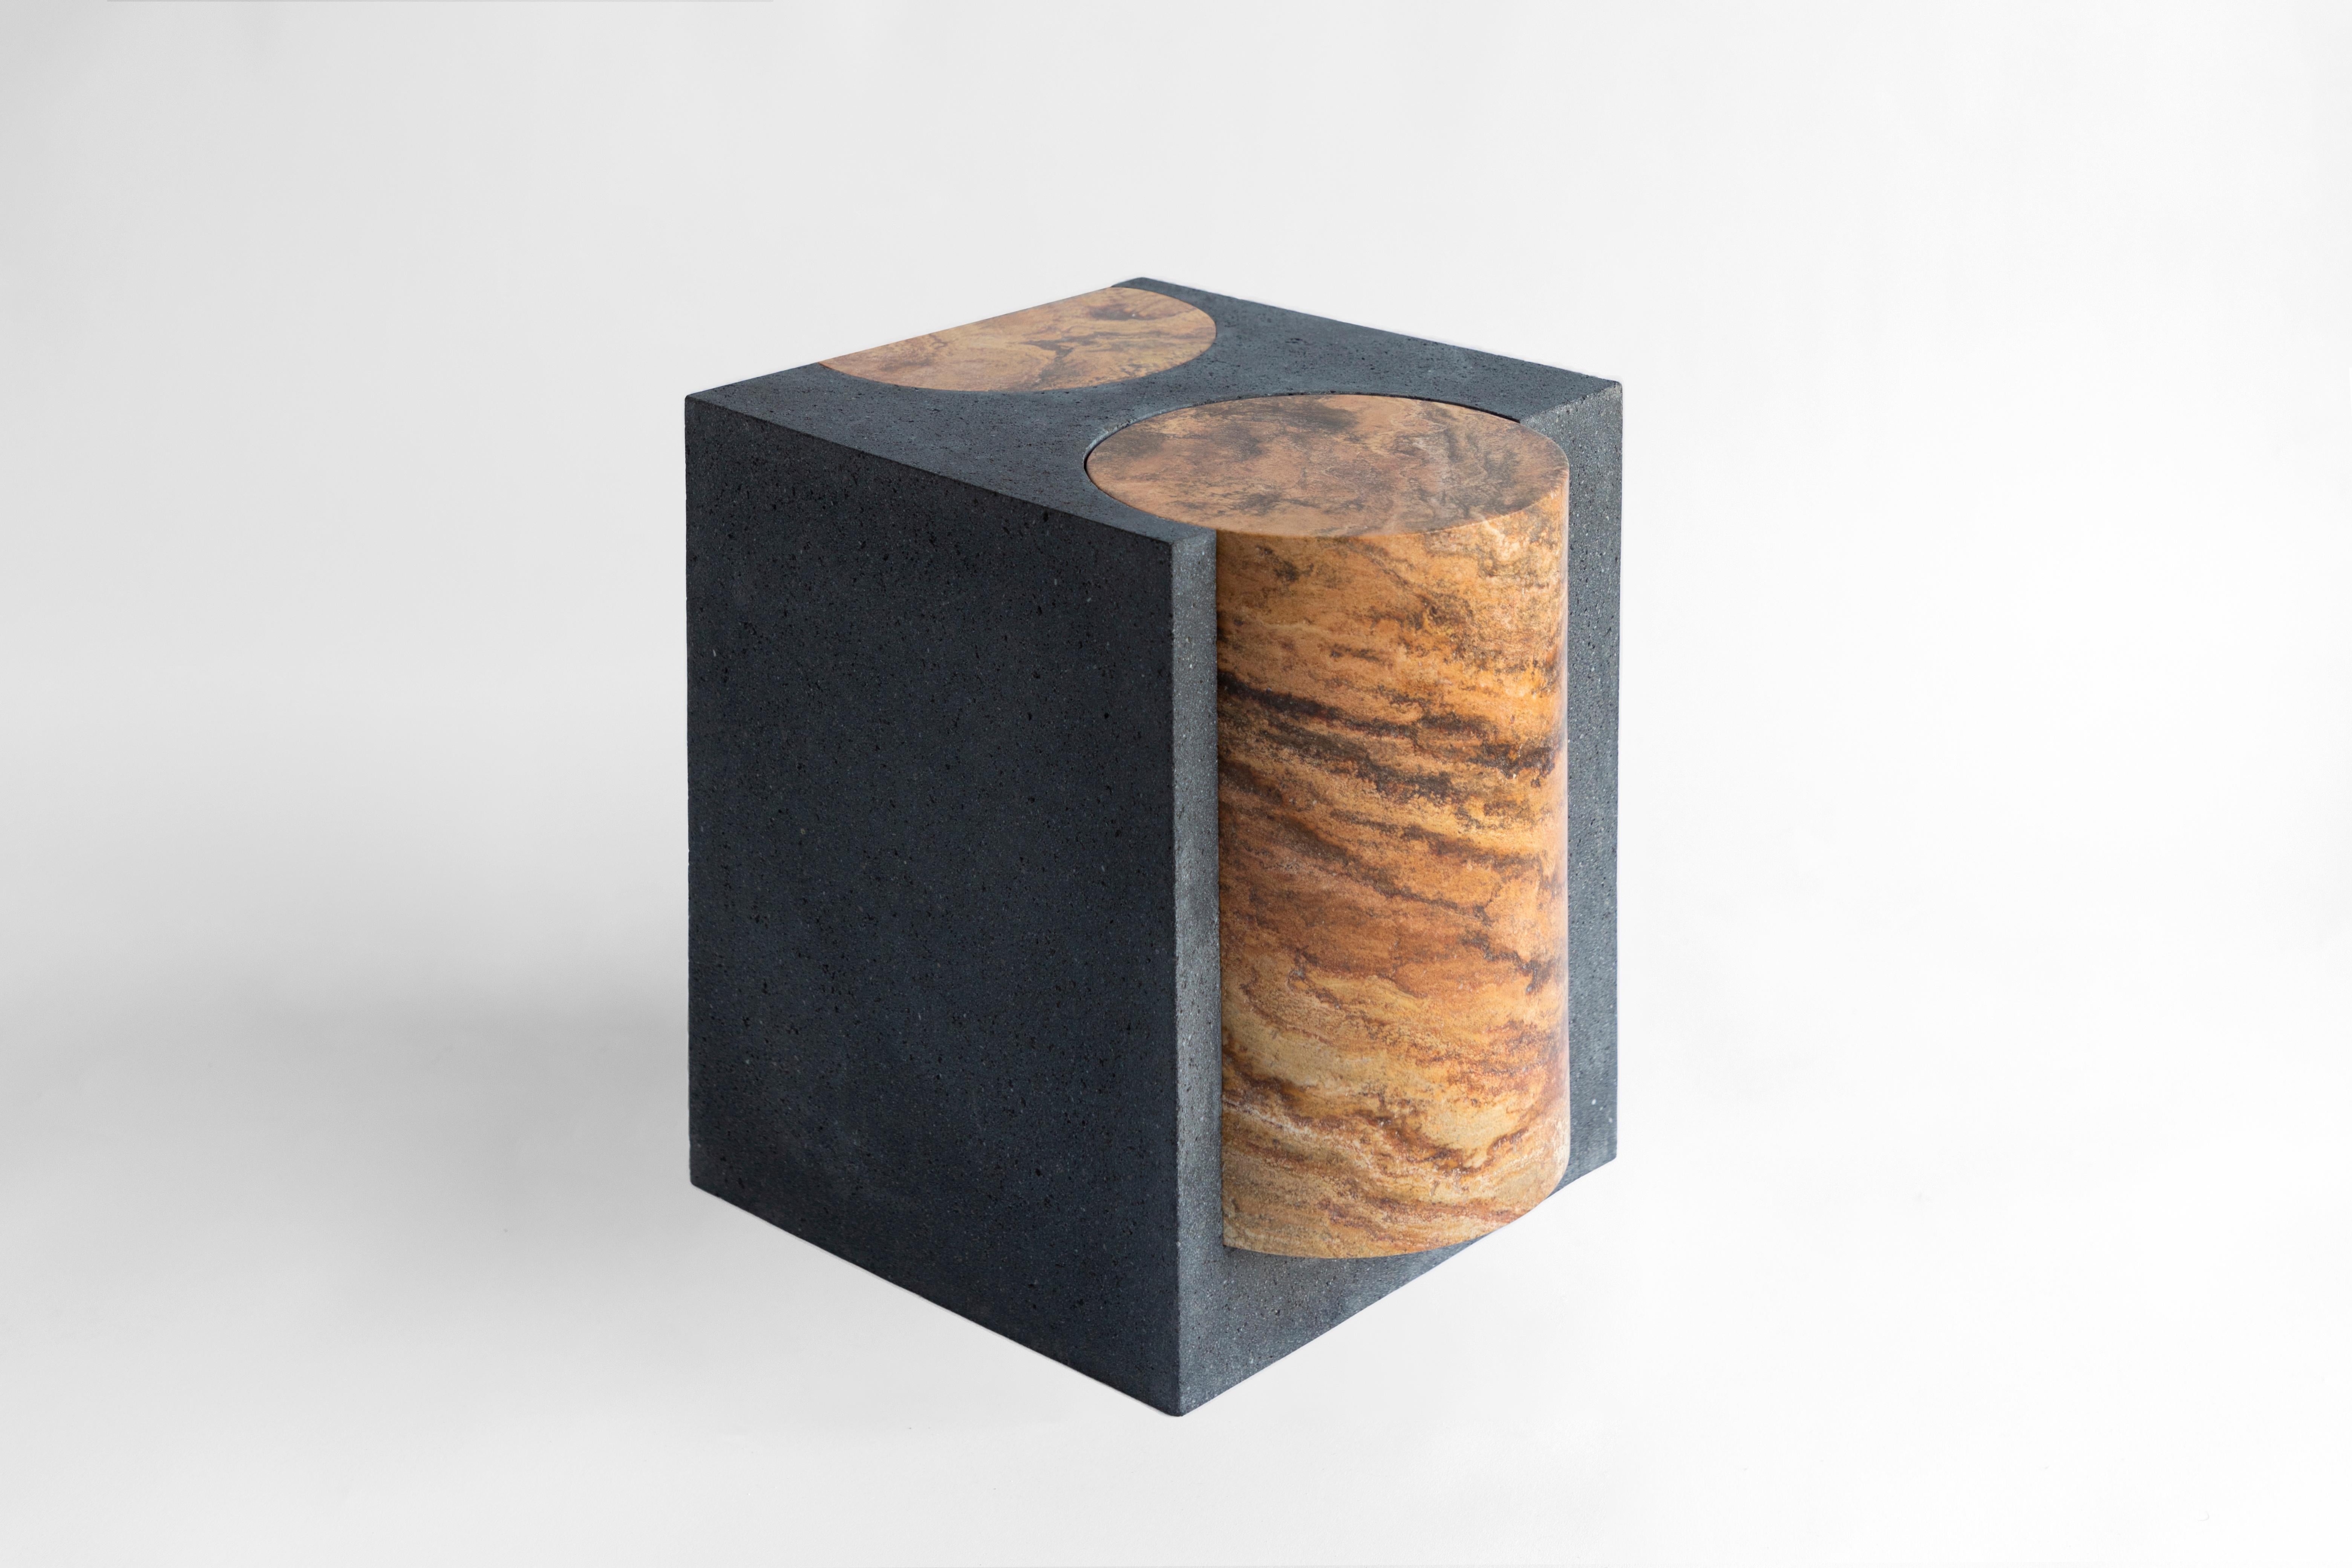 Stone Volcanic Shade I Stool/Table by Sten Studio, Represented by Tuleste Factory